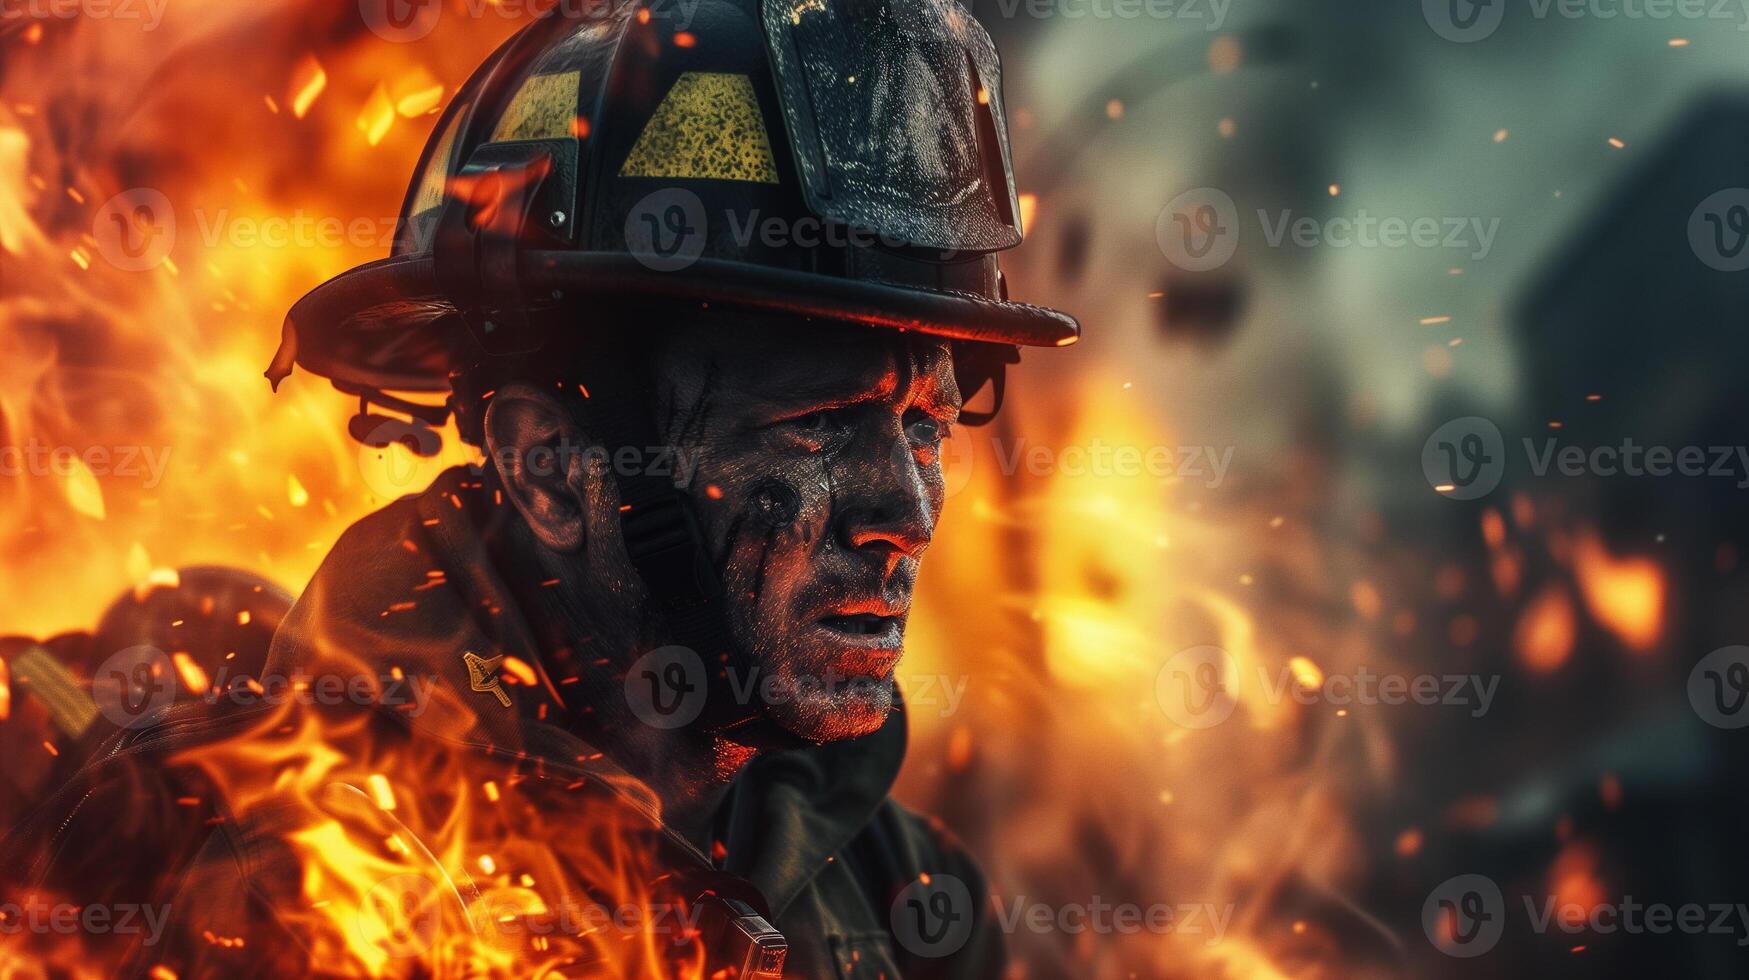 AI generated A close-up photograph of a fireman yelling, face contorted in fury and sorrow, against a backdrop of fierce flames consuming a structure. photo